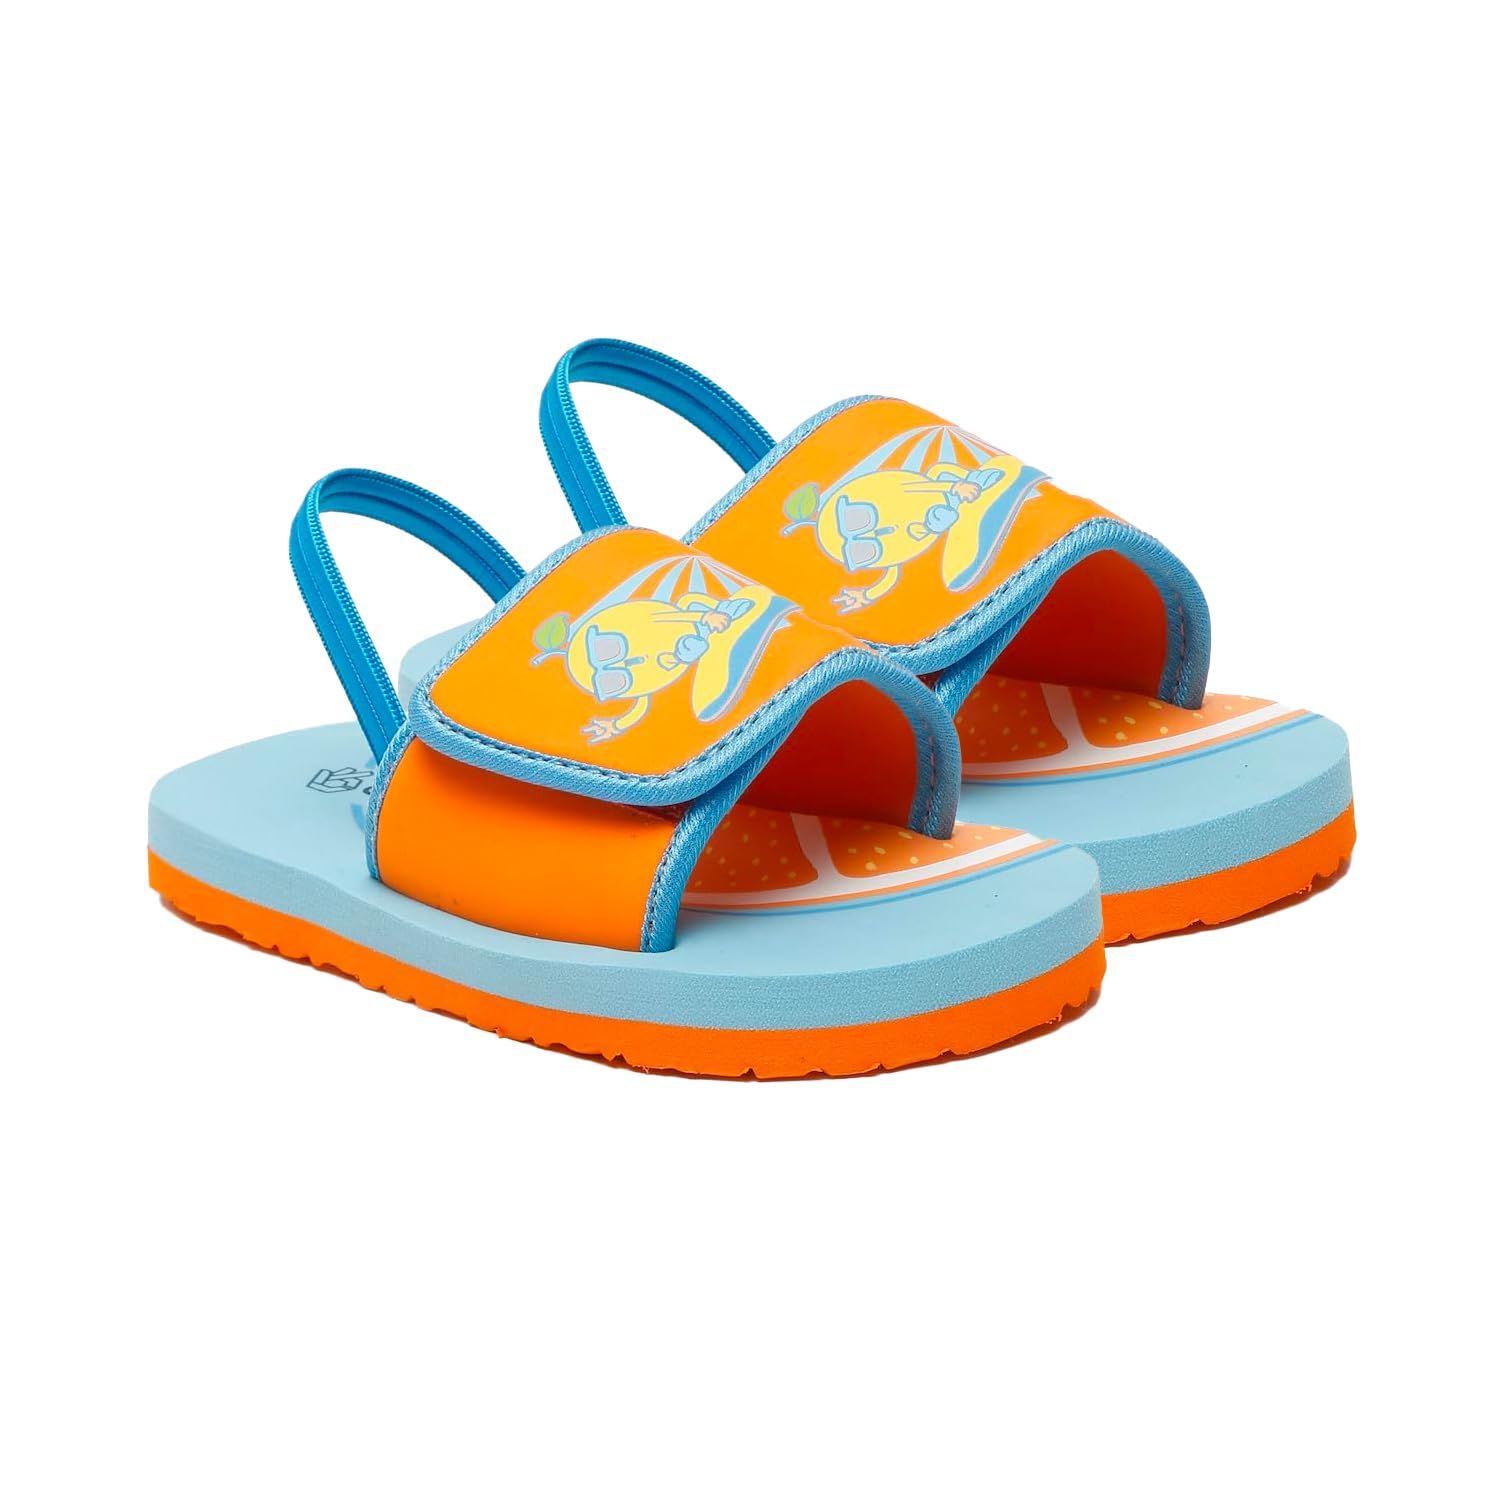 ONYC Kids Surfing Slippers for Boys and Girls - Sky Blue